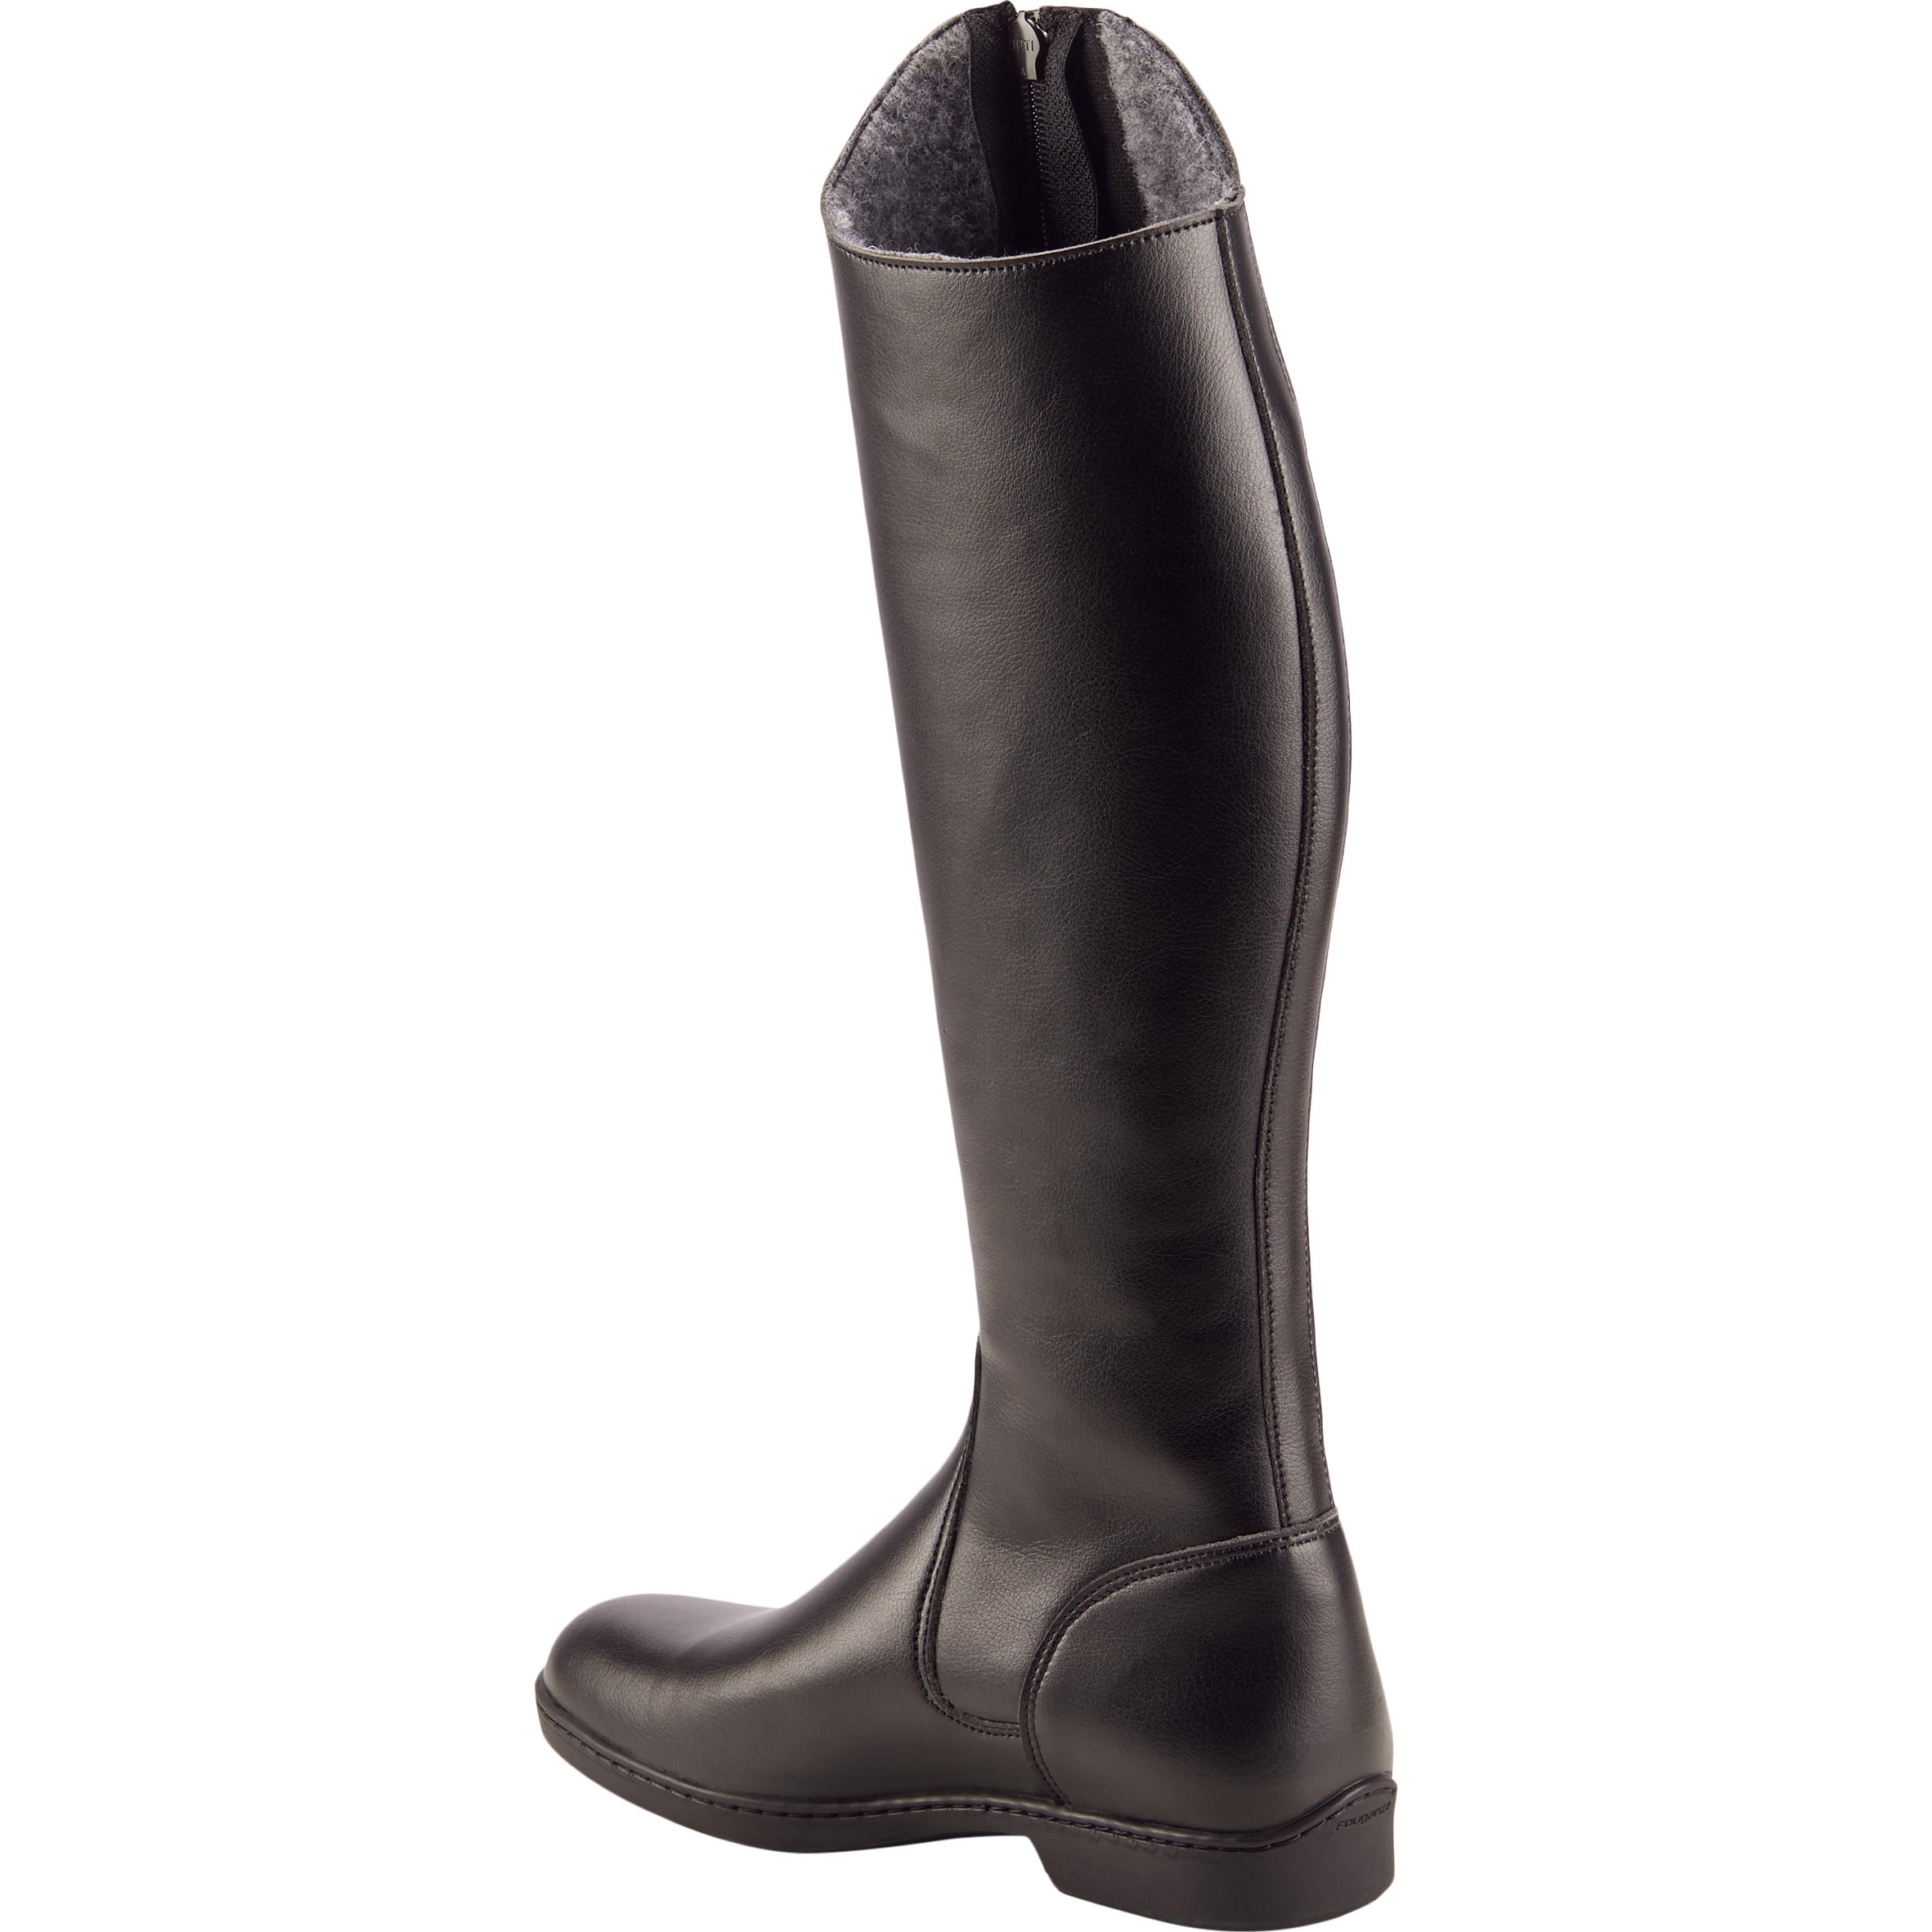 500 Warm Adult Horse Riding  Long Boots - Black 4/7